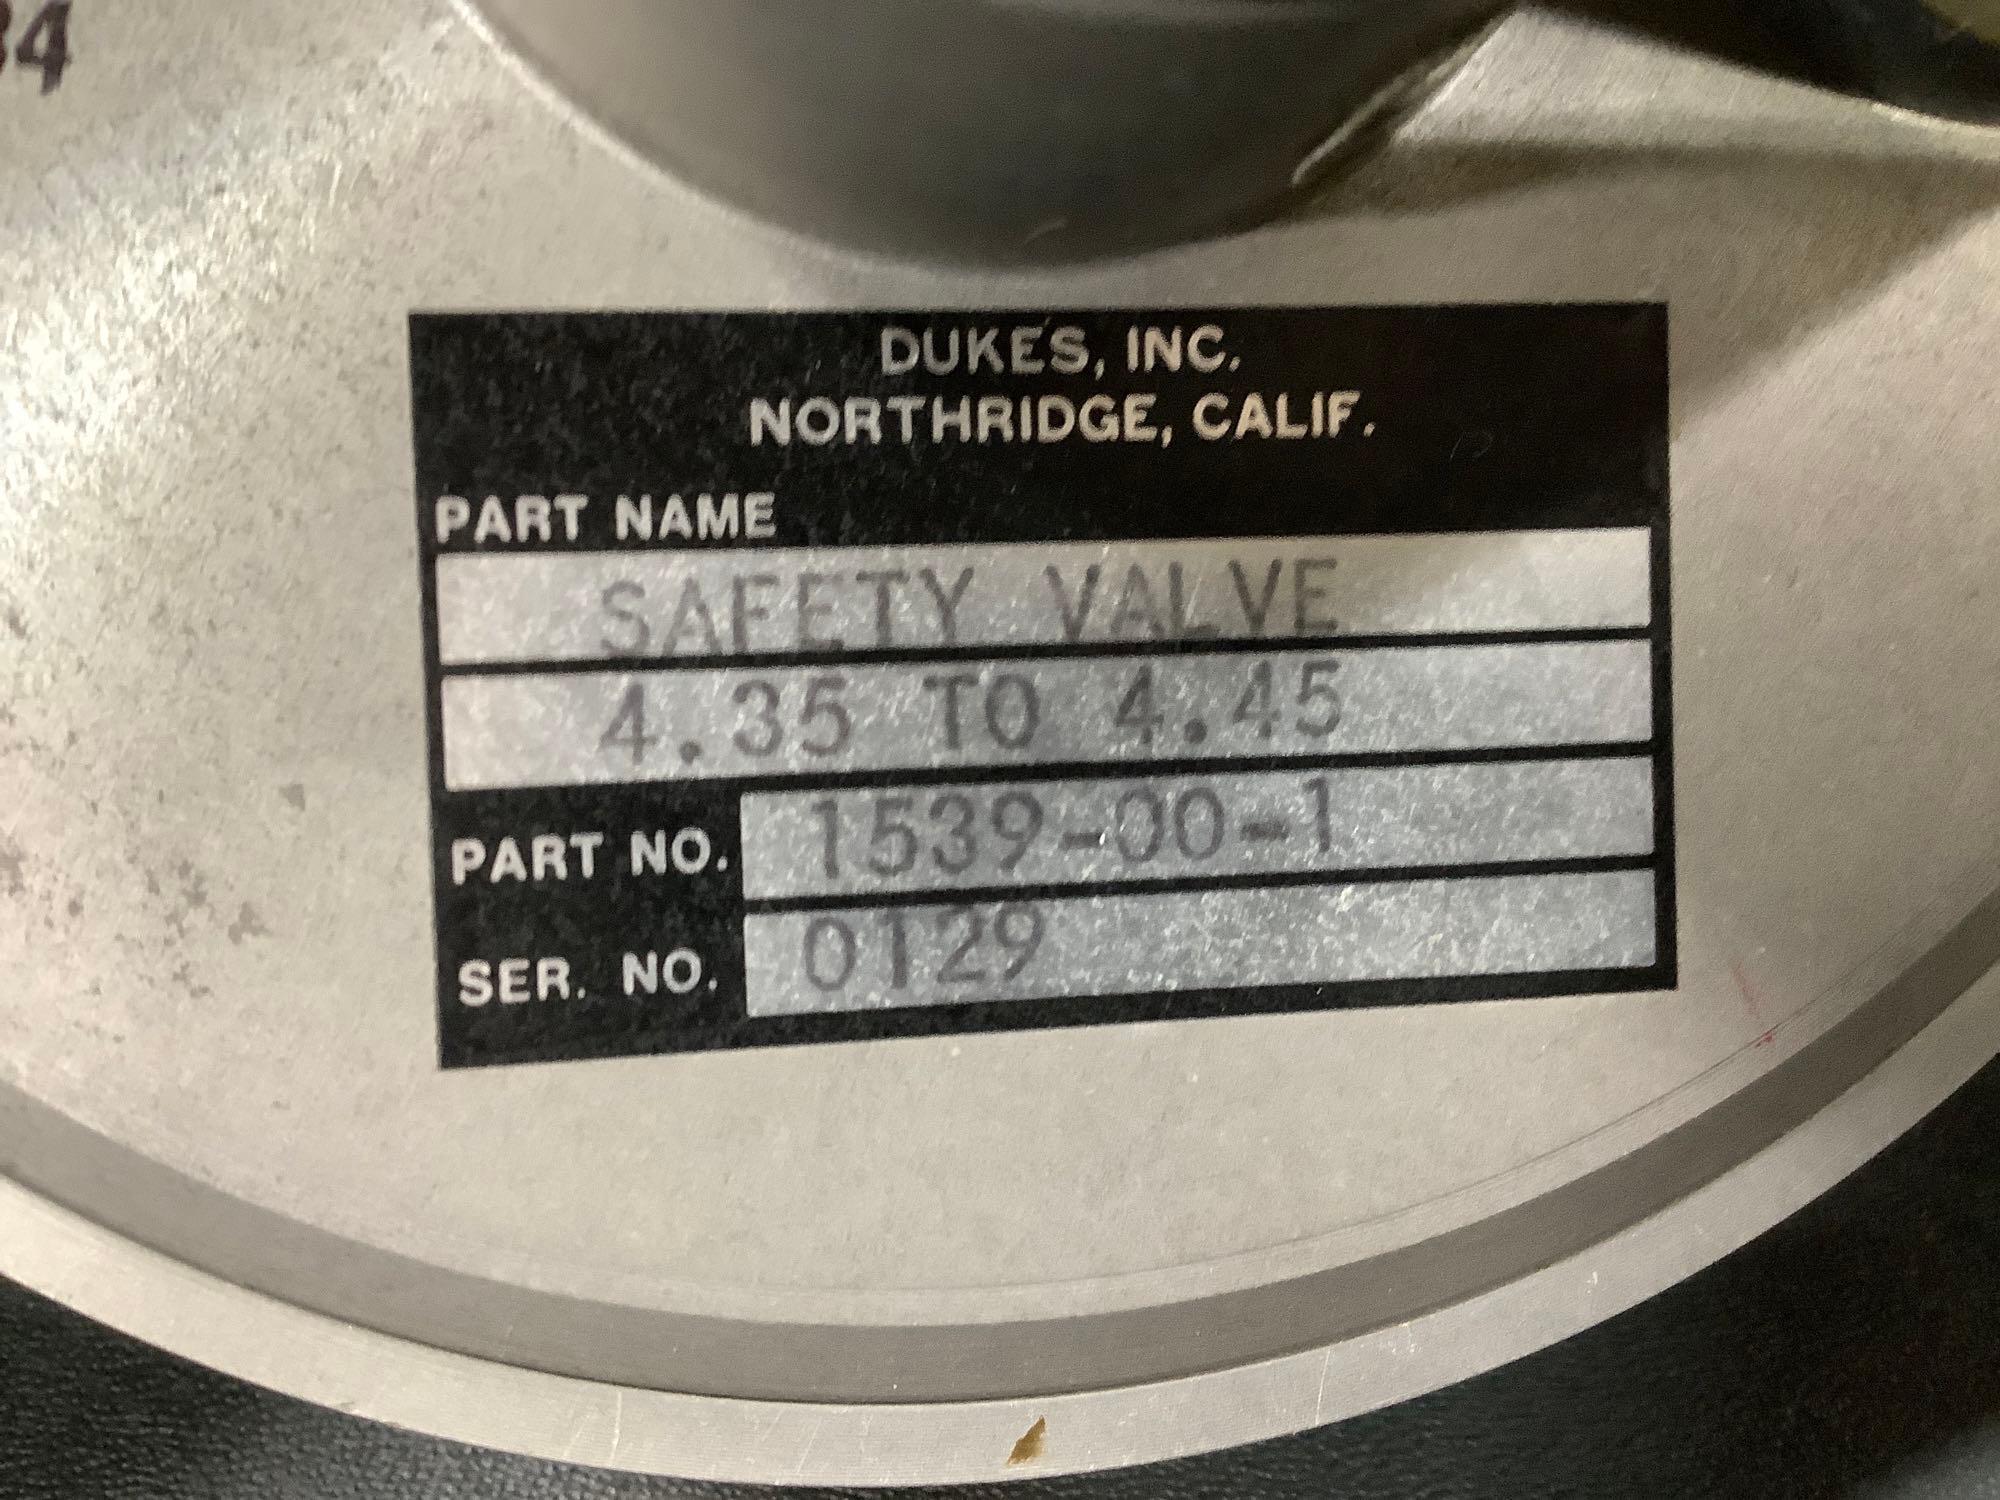 DUKES SAFETY/OUTFLOW VALVES 1539-00-1 (REPAIRED/SOME WITH MANUFACTURES TEST SHEET)